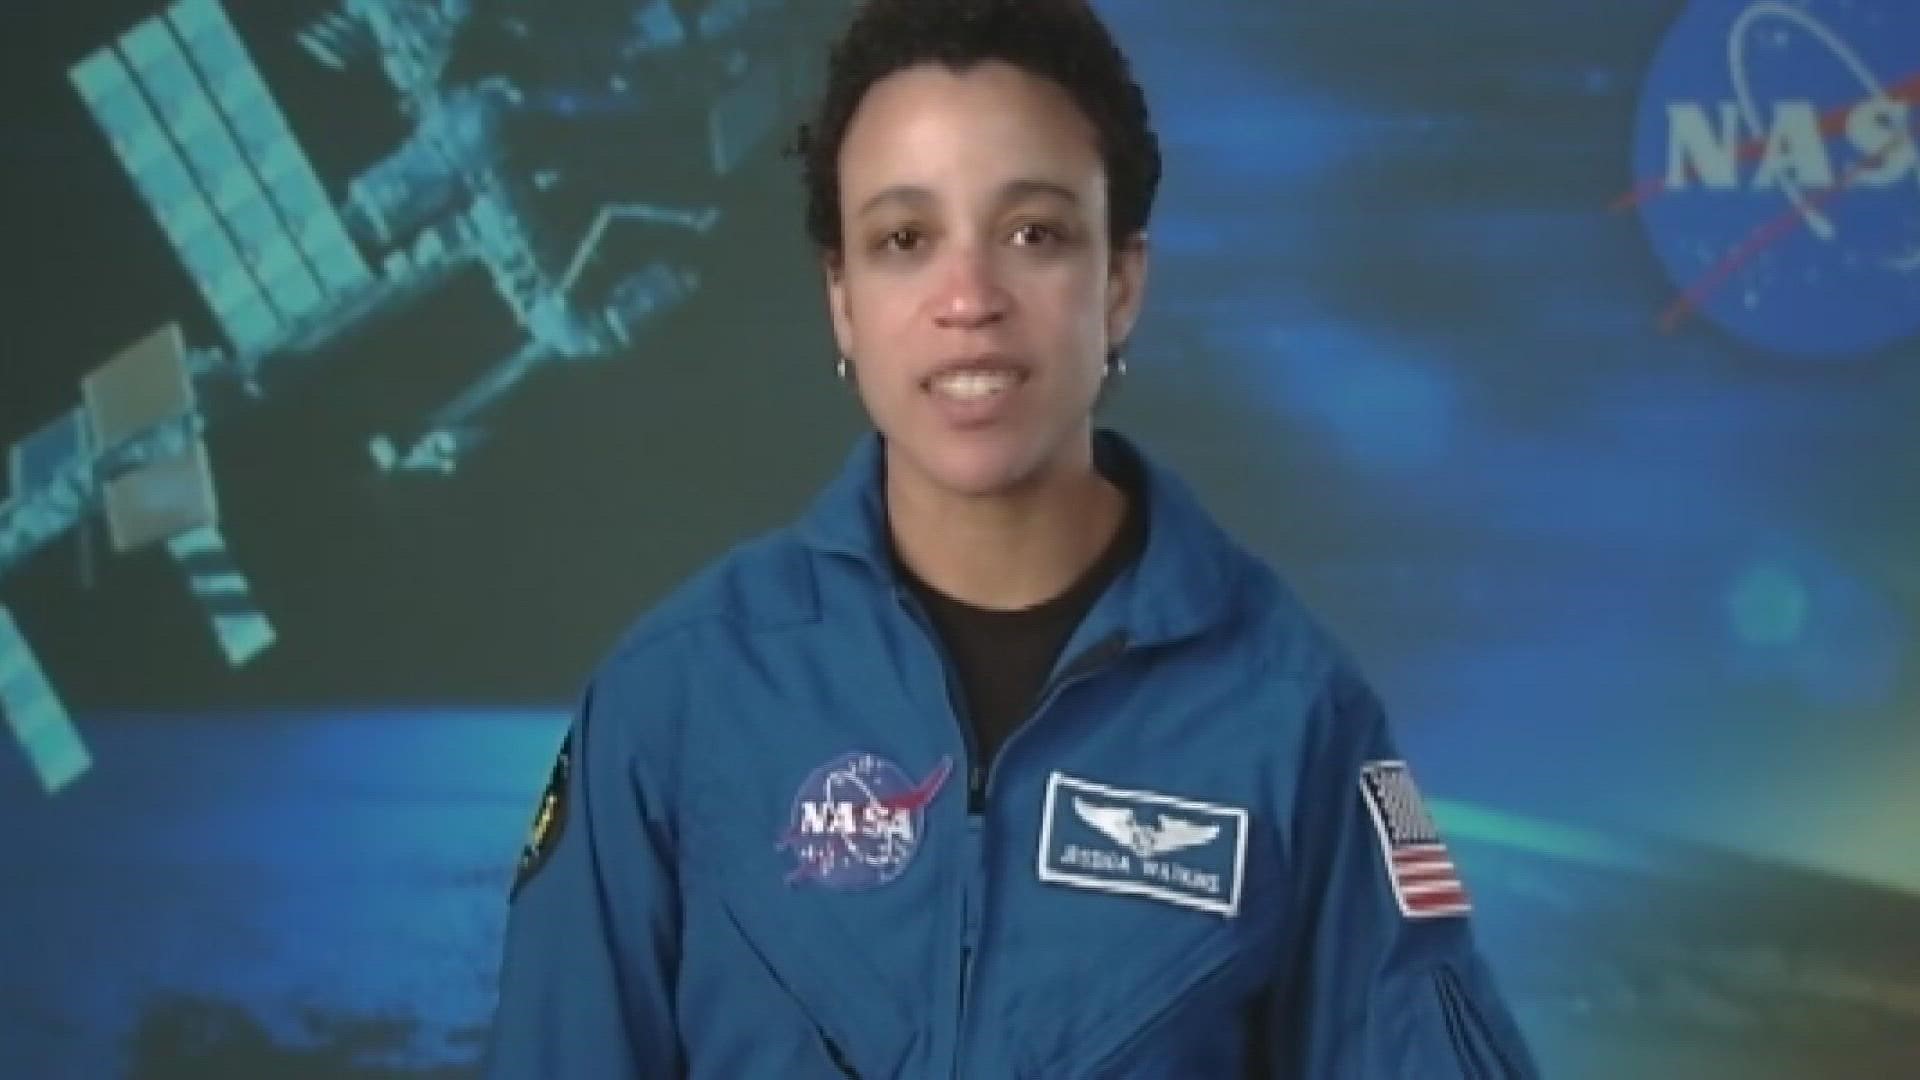 Jessica Watkins will make history on Saturday as the first Black woman assigned to the International Space Station.